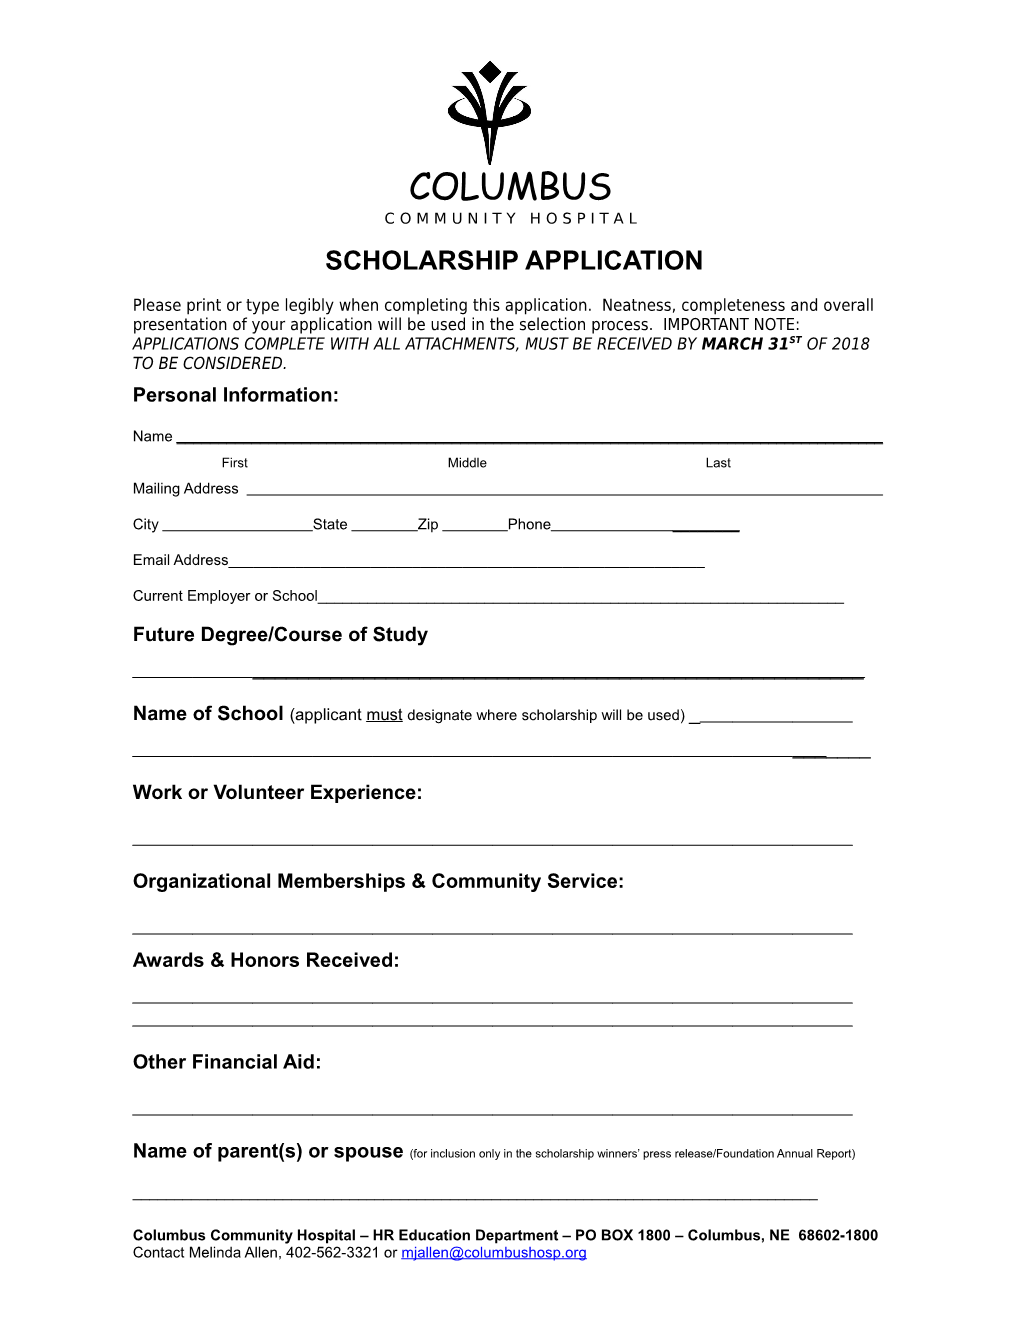 Please Print Legibly When Completing This Application You May Also Reproduce This Form